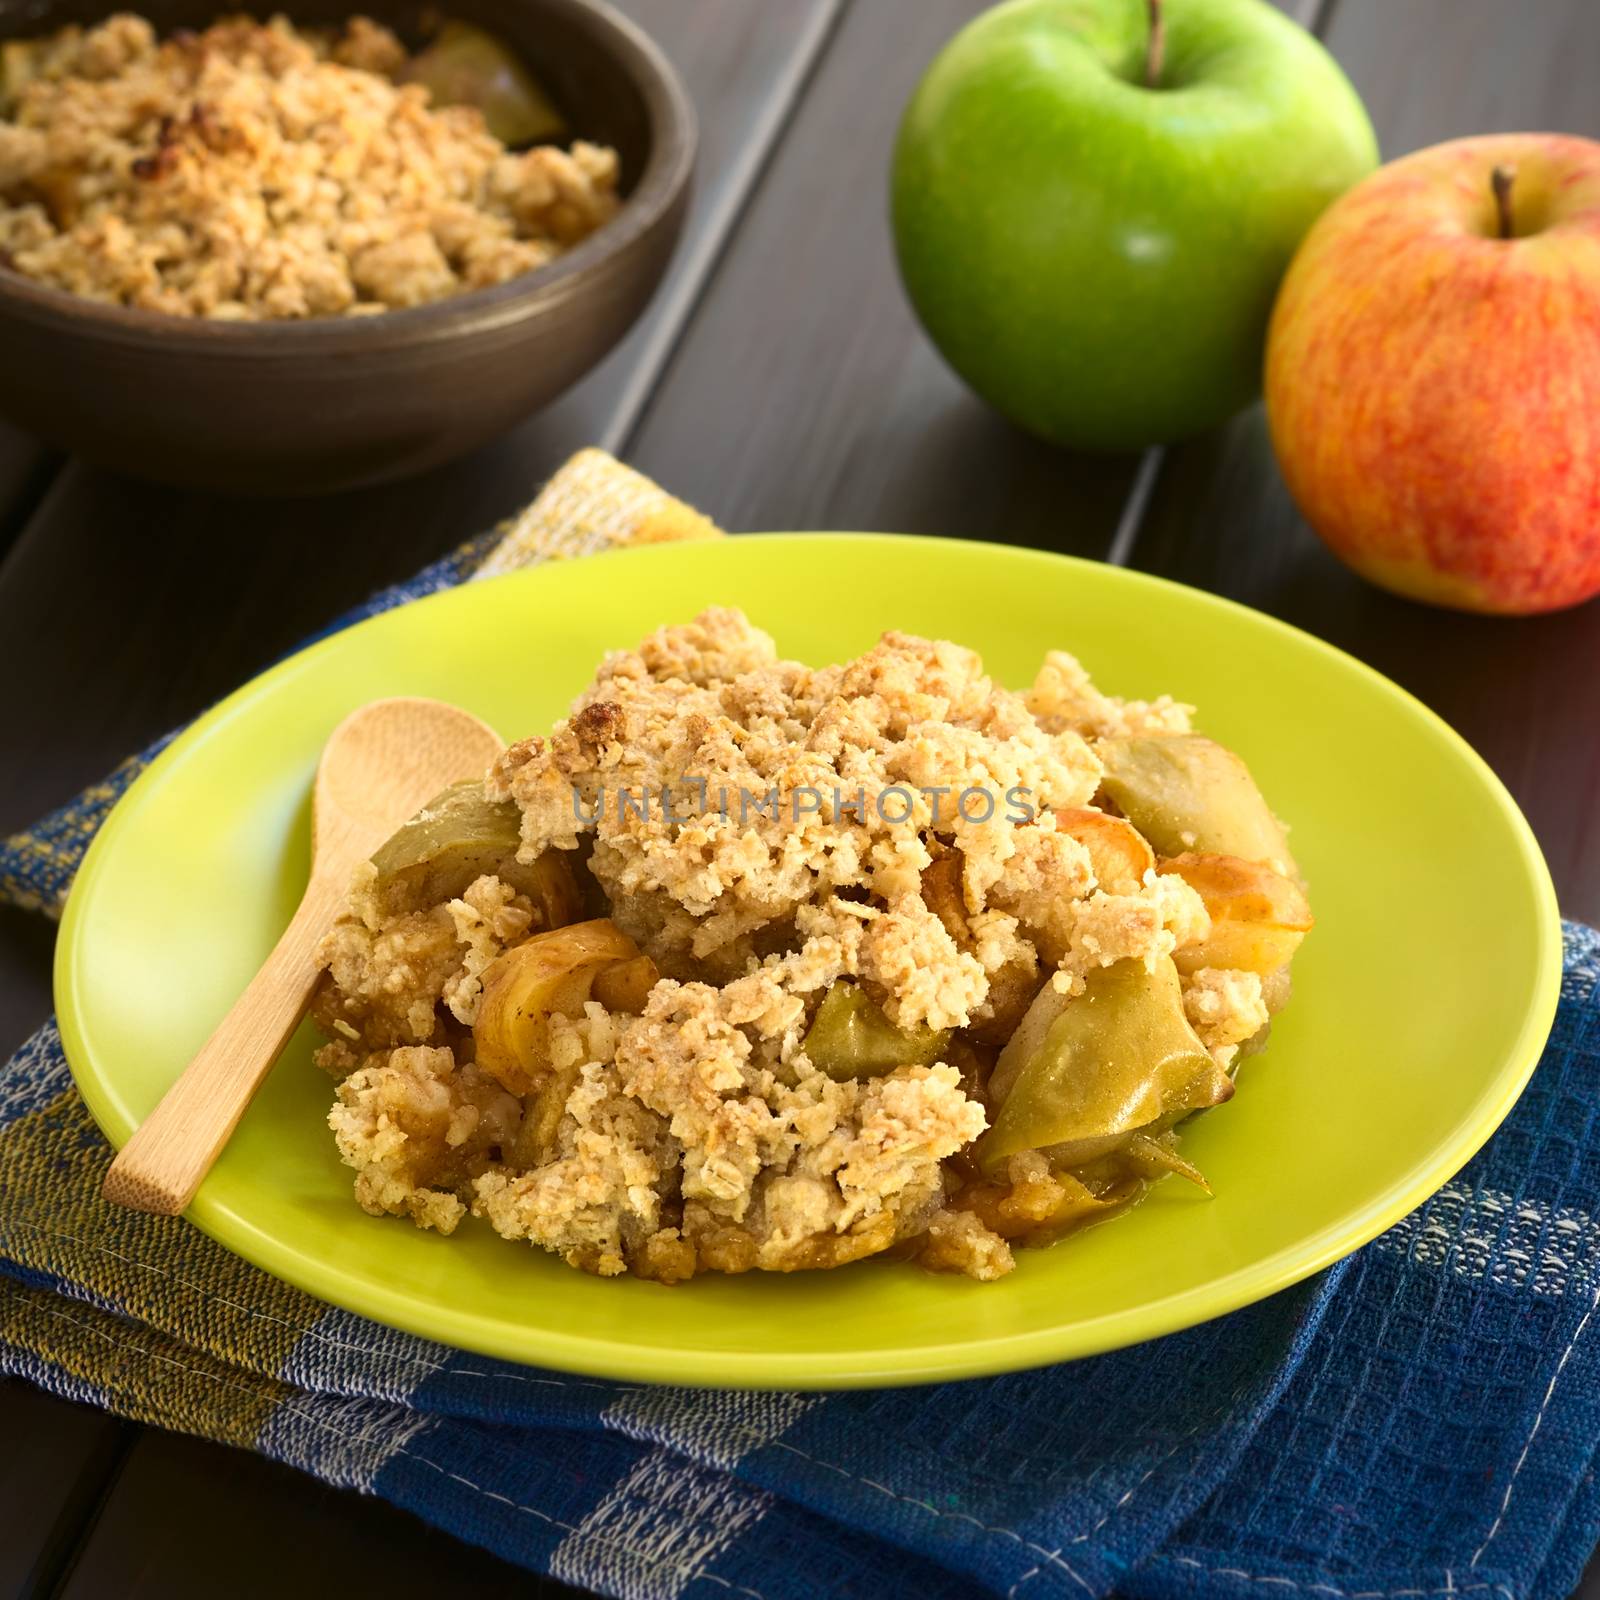 Freshly baked apple crumble or crisp served on plate with wooden spoon, fresh apples and a rustic bowl of apple crumble in the back, photographed on dark wood with natural light (Selective Focus, Focus one third into the crumble)